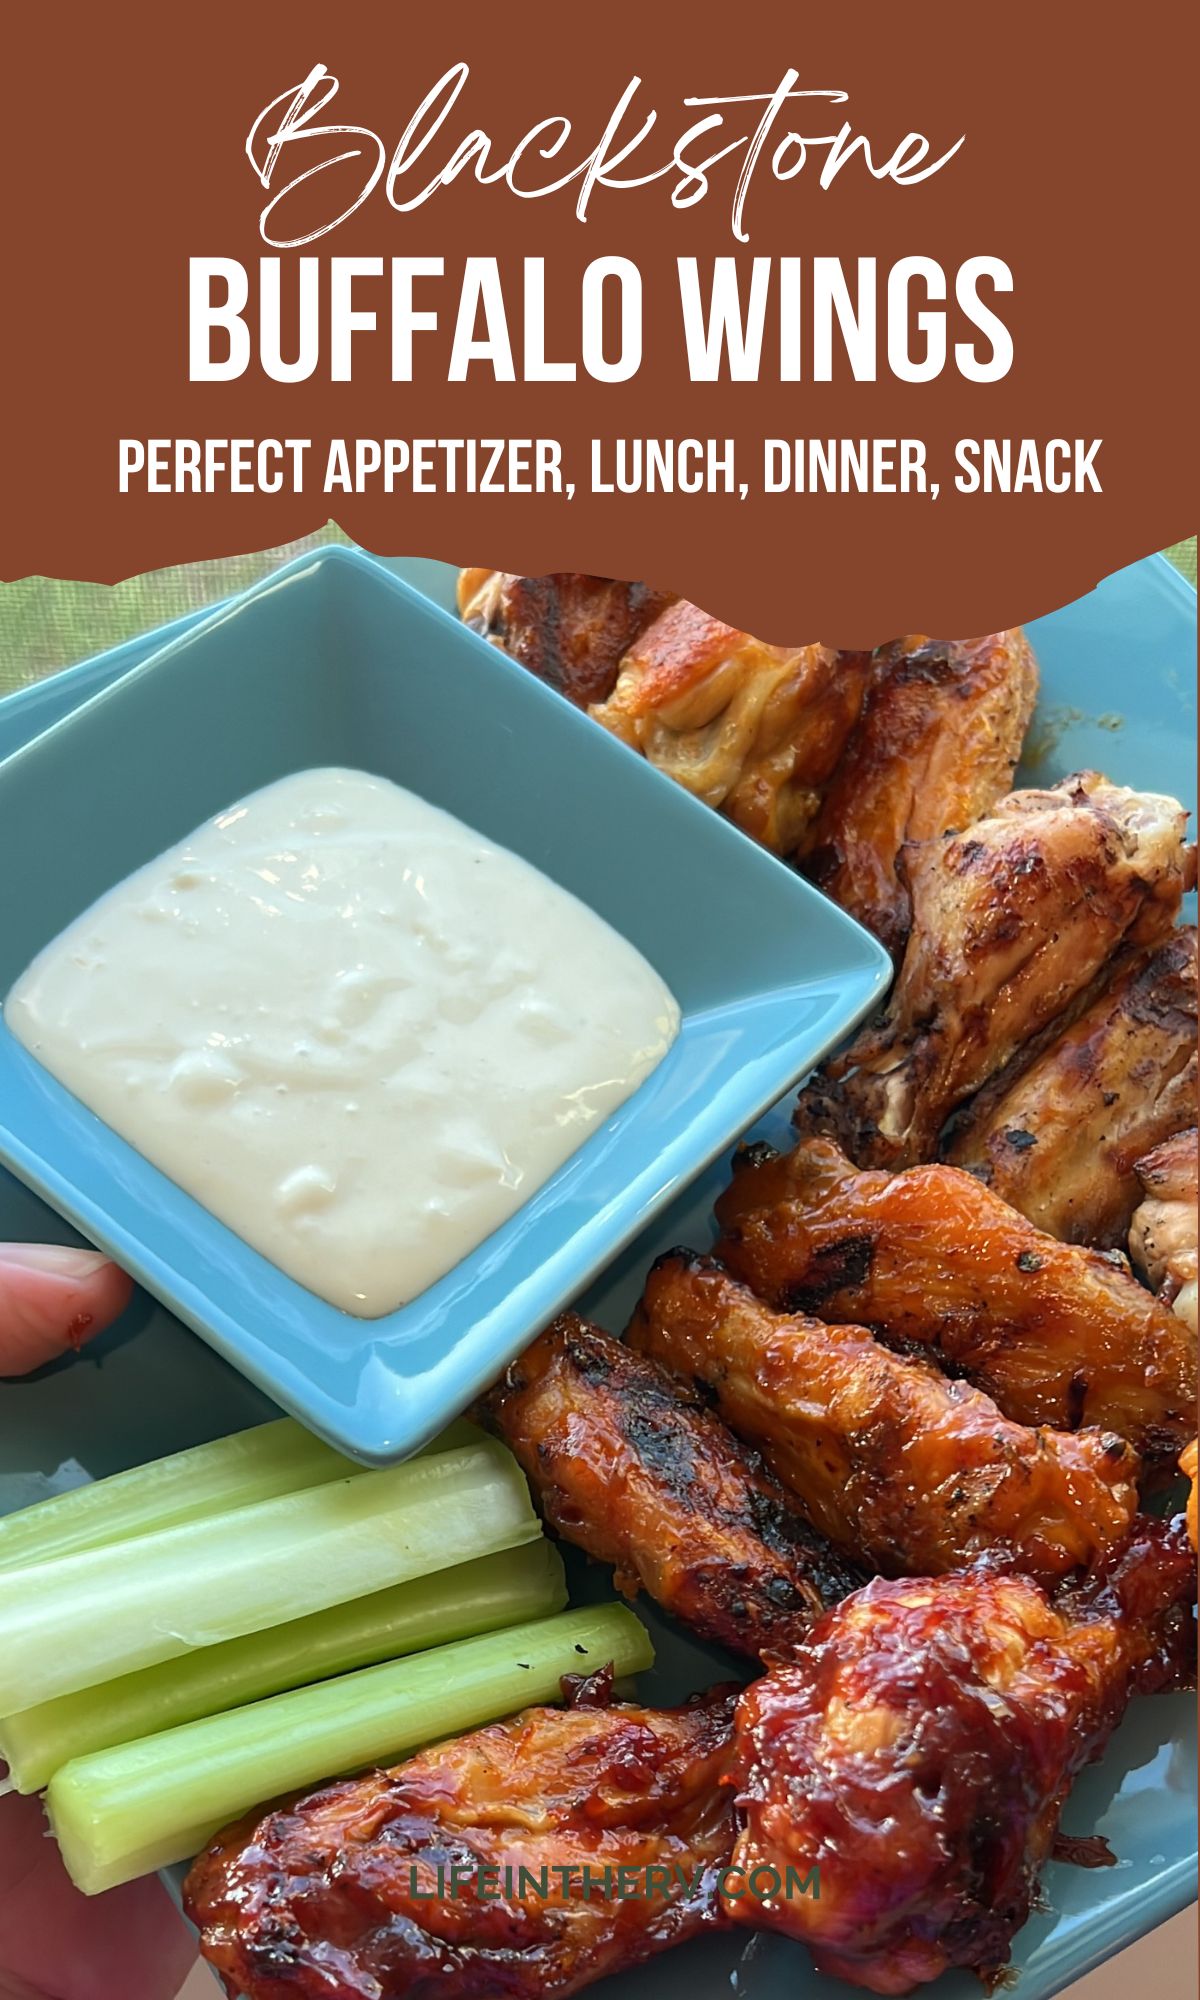 Blackstone buffalo wings perfect appetizer, lunch, dinner, snack.